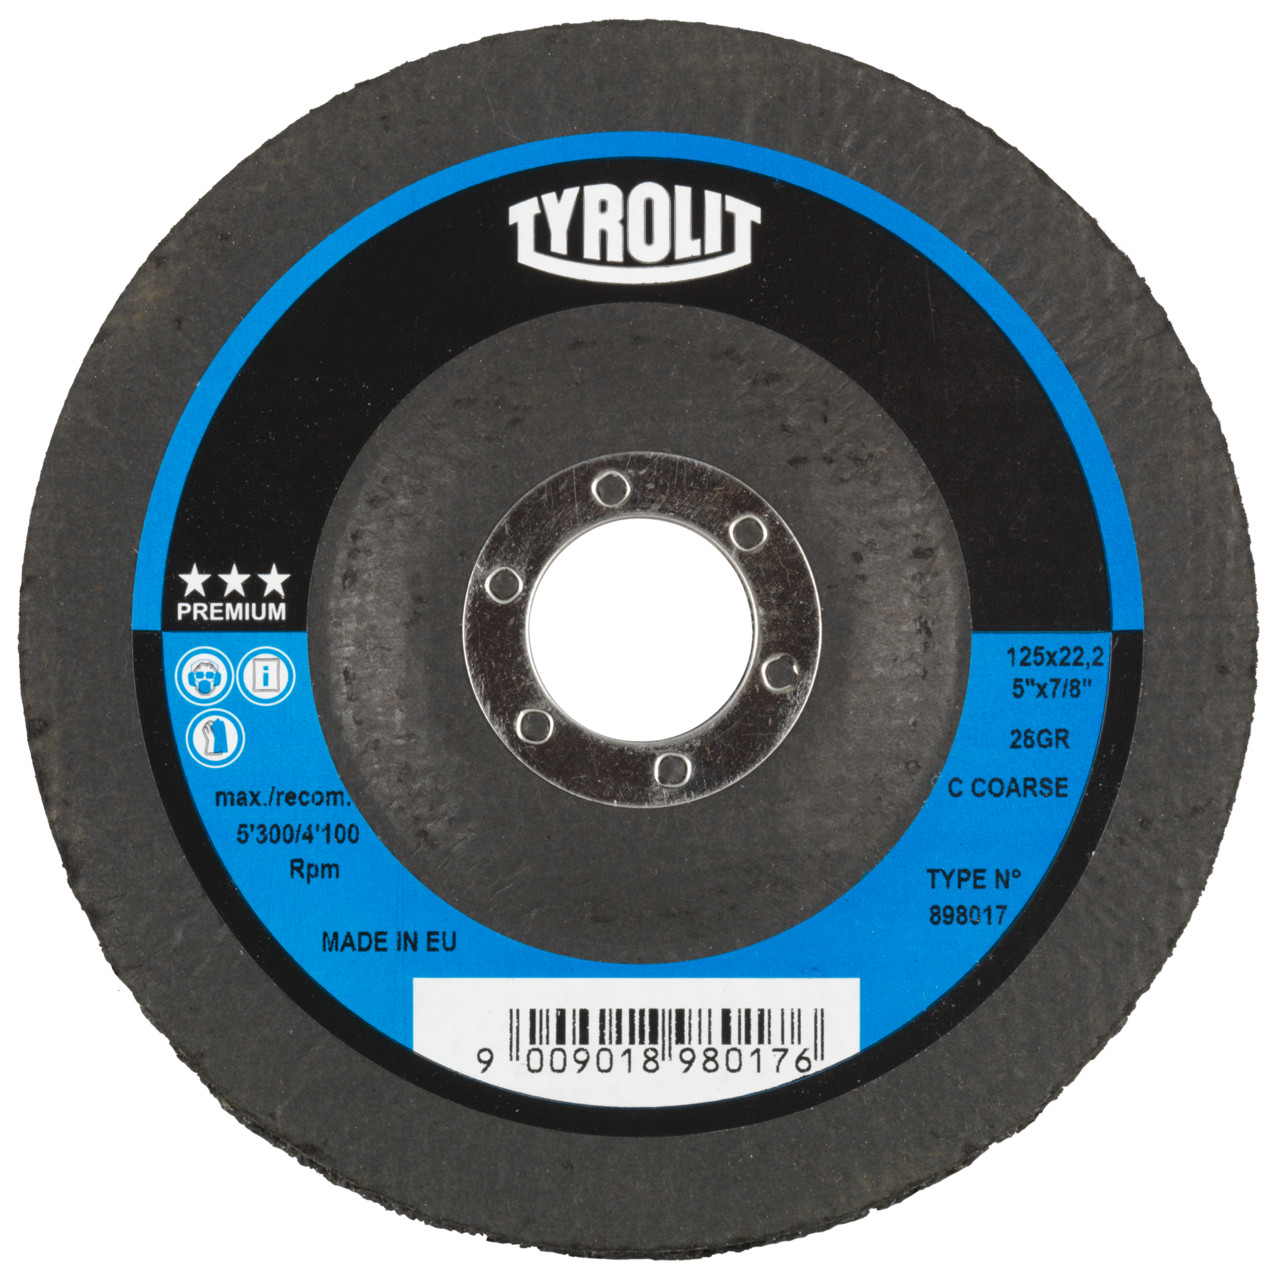 Tyrolit Coarse cleaning disc DxH 178x22.2 Universally applicable, A EX. GROB, shape: 28, Art. 34206238